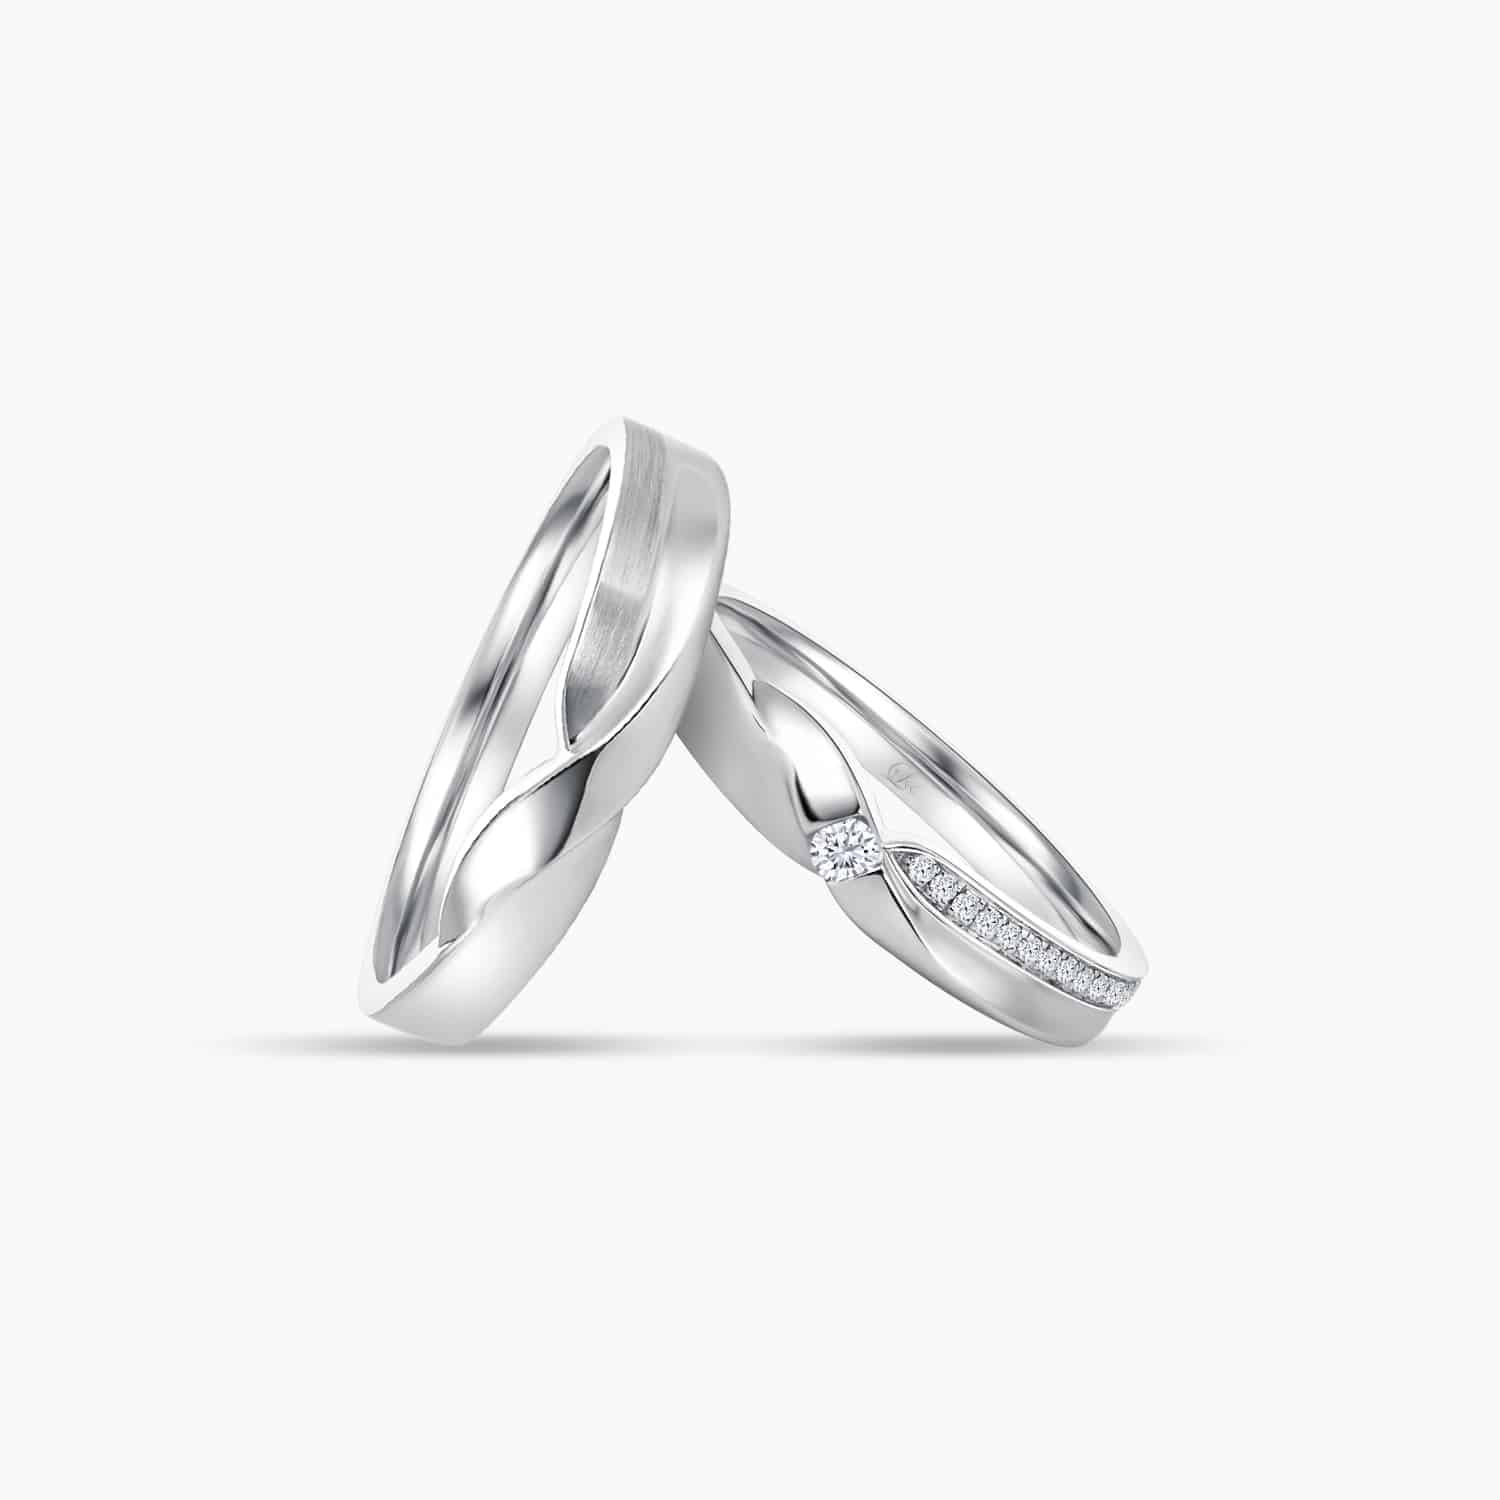 LVC DESIRIO PASSION WEDDING BAND IN WHITE GOLD WITH A CENTER DIAMOND INLAY a set of white gold engagement wedding ring or wedding bands in 18k white gold with diamonds 钻石 戒指 cincin diamond